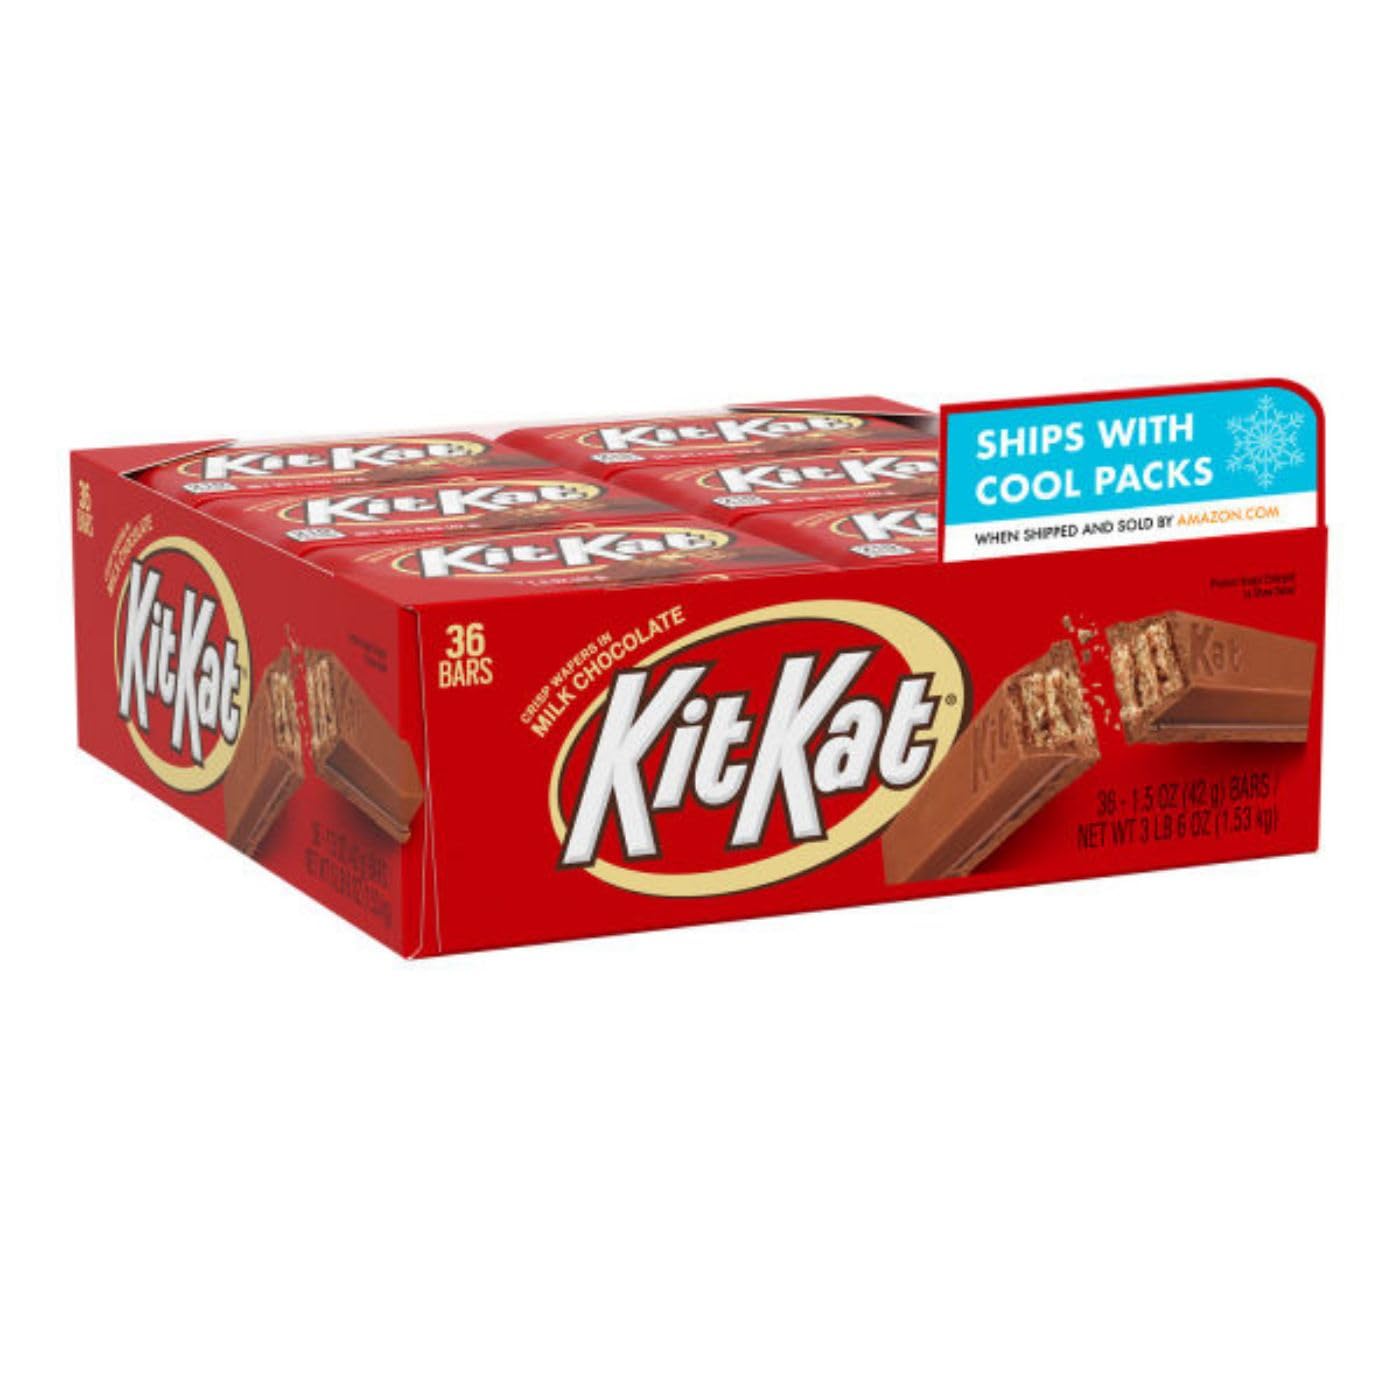 YMMV 36 count KIT KAT Milk Chocolate Wafer Candy Bars, 1.5 oz, $23.79 w/ coupon & S&S, + more